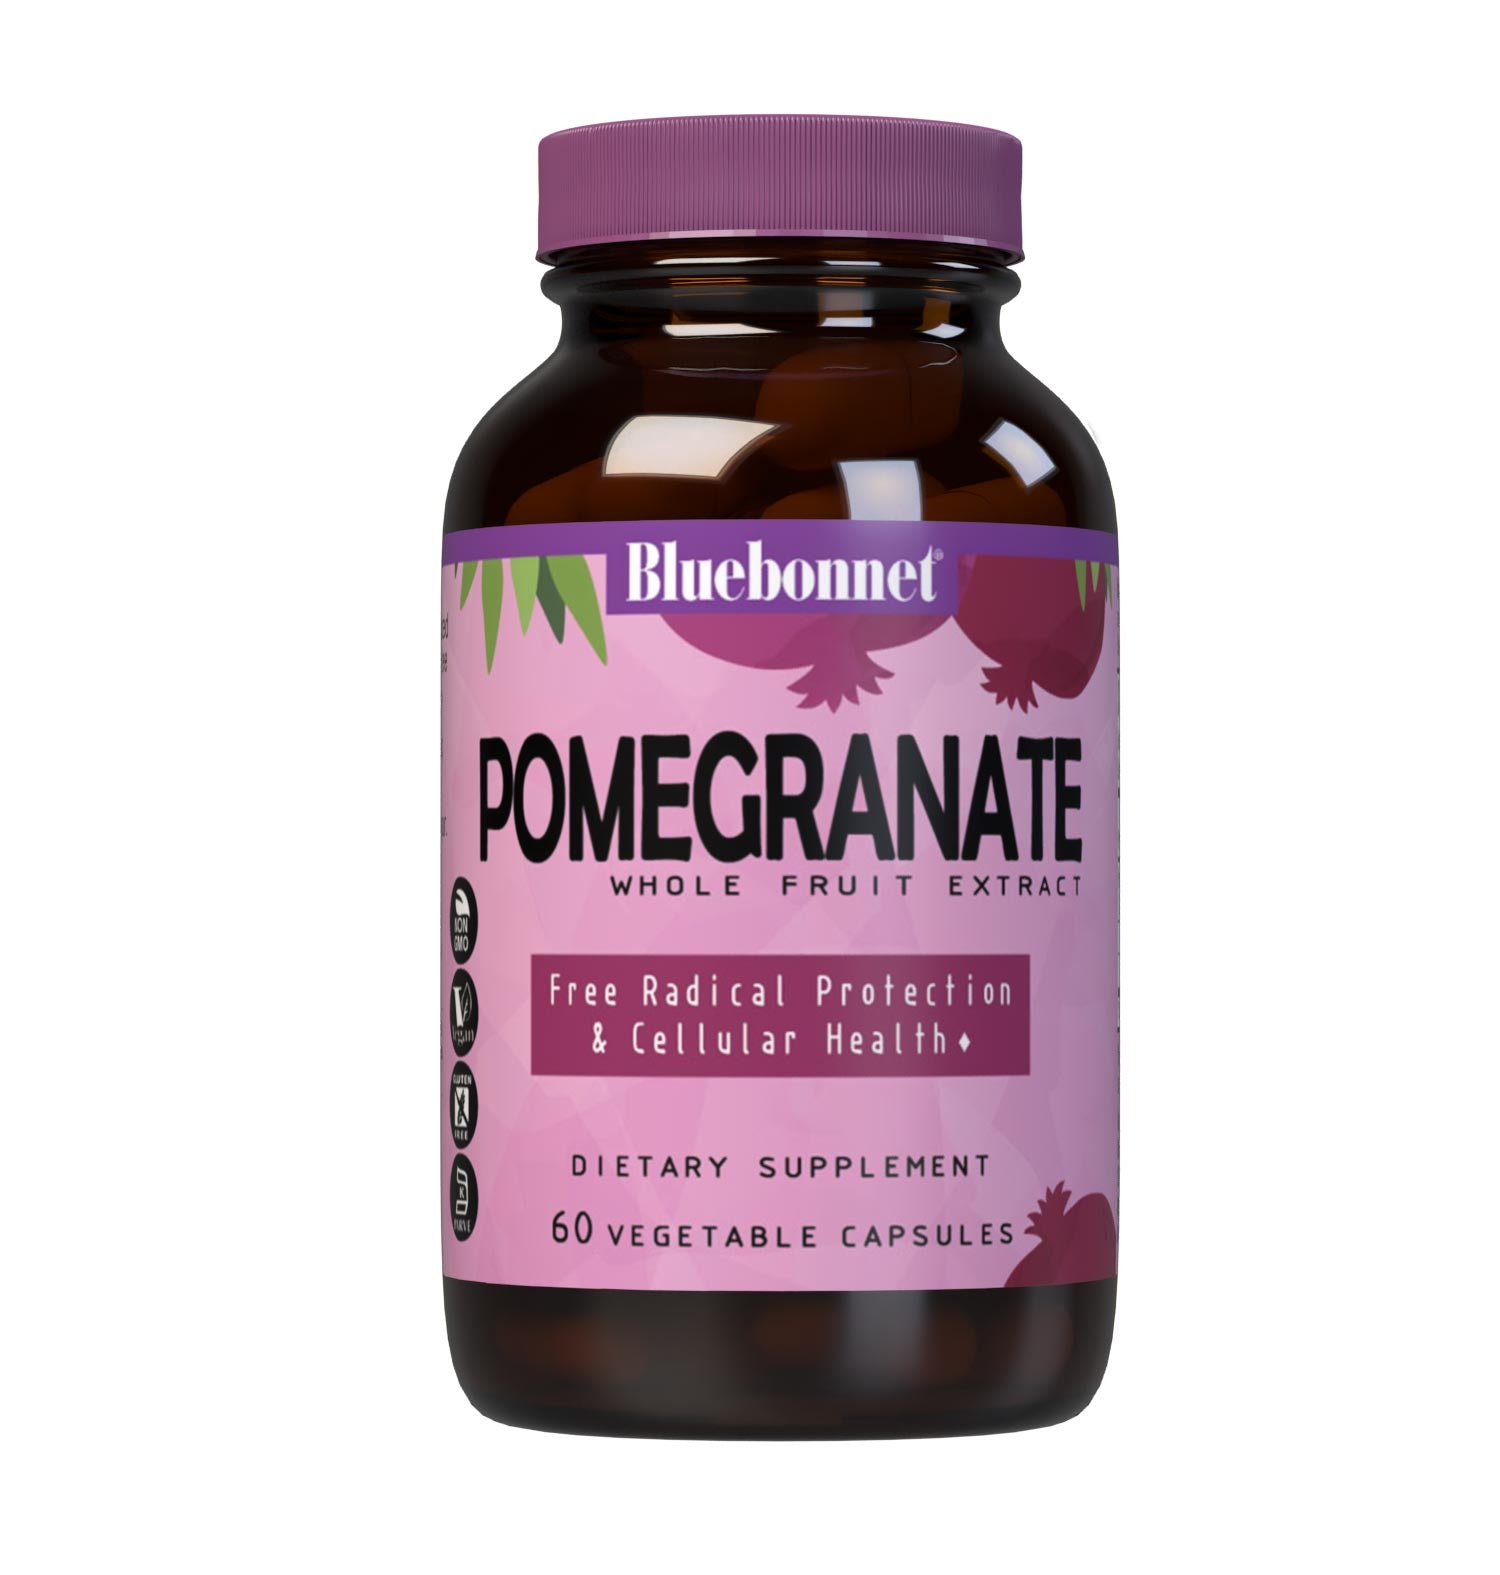 Bluebonnet’s Pomegranate Whole Fruit Extract 60 Vegetable Capsules are formulated with a whole fruit extract that supplies polyphenols and punacalagins that provide free radical protection. #size_60 count